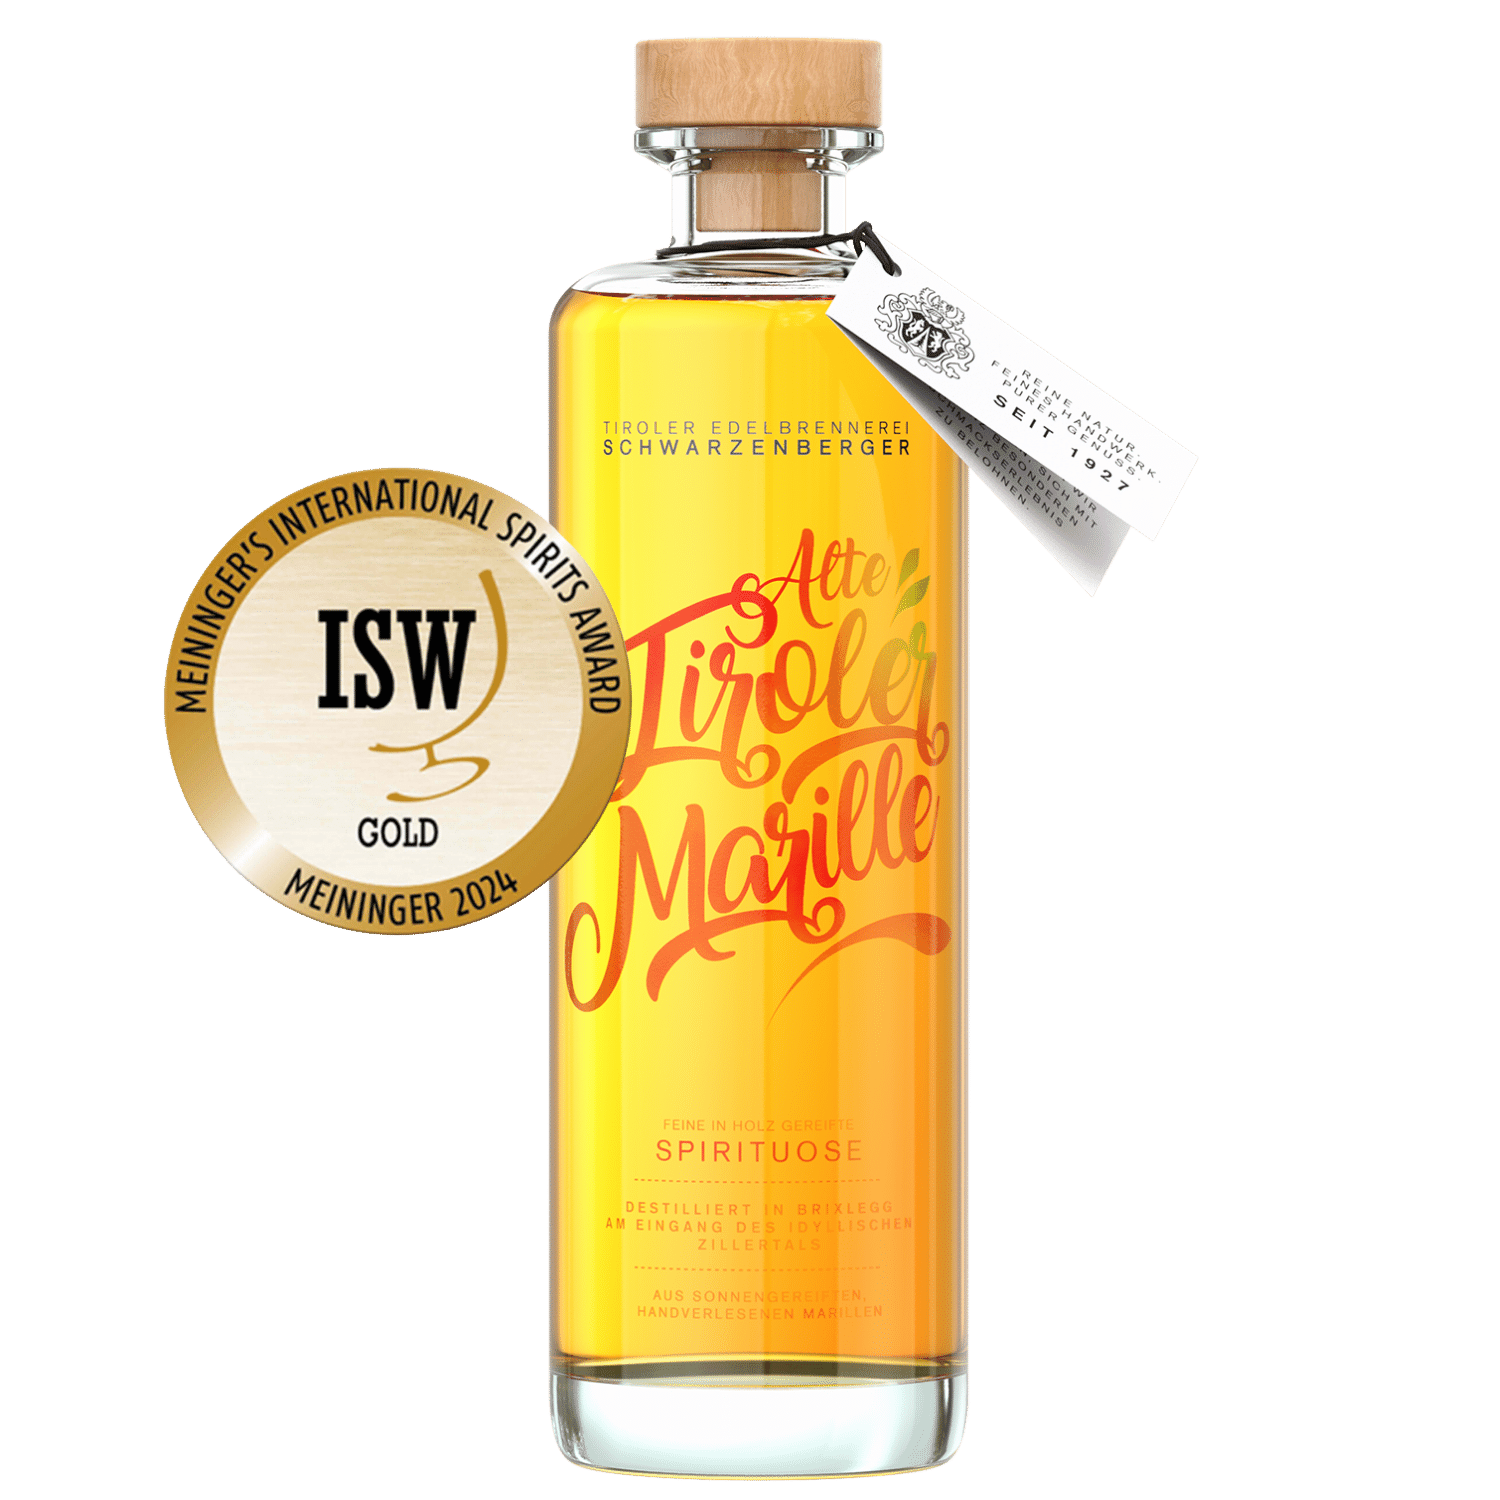 Gold awarded Apricot Schnapps from the Edelbrennerei Schwarzenberger in a noble bottle